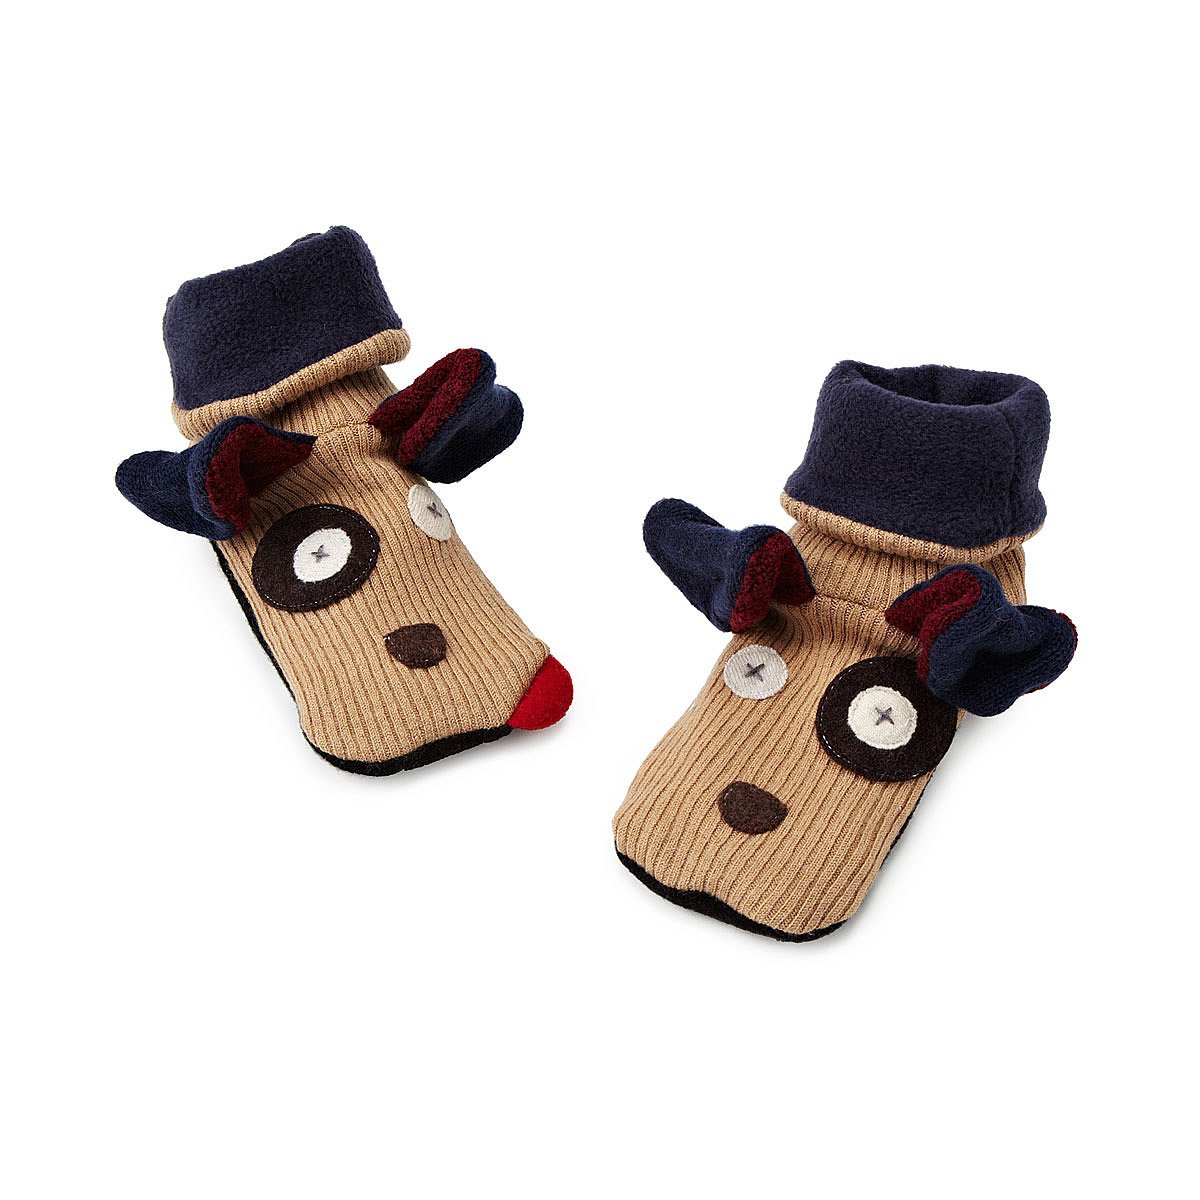 Toddler Dog Slippers | baby shoes, wool slippers | UncommonGoods